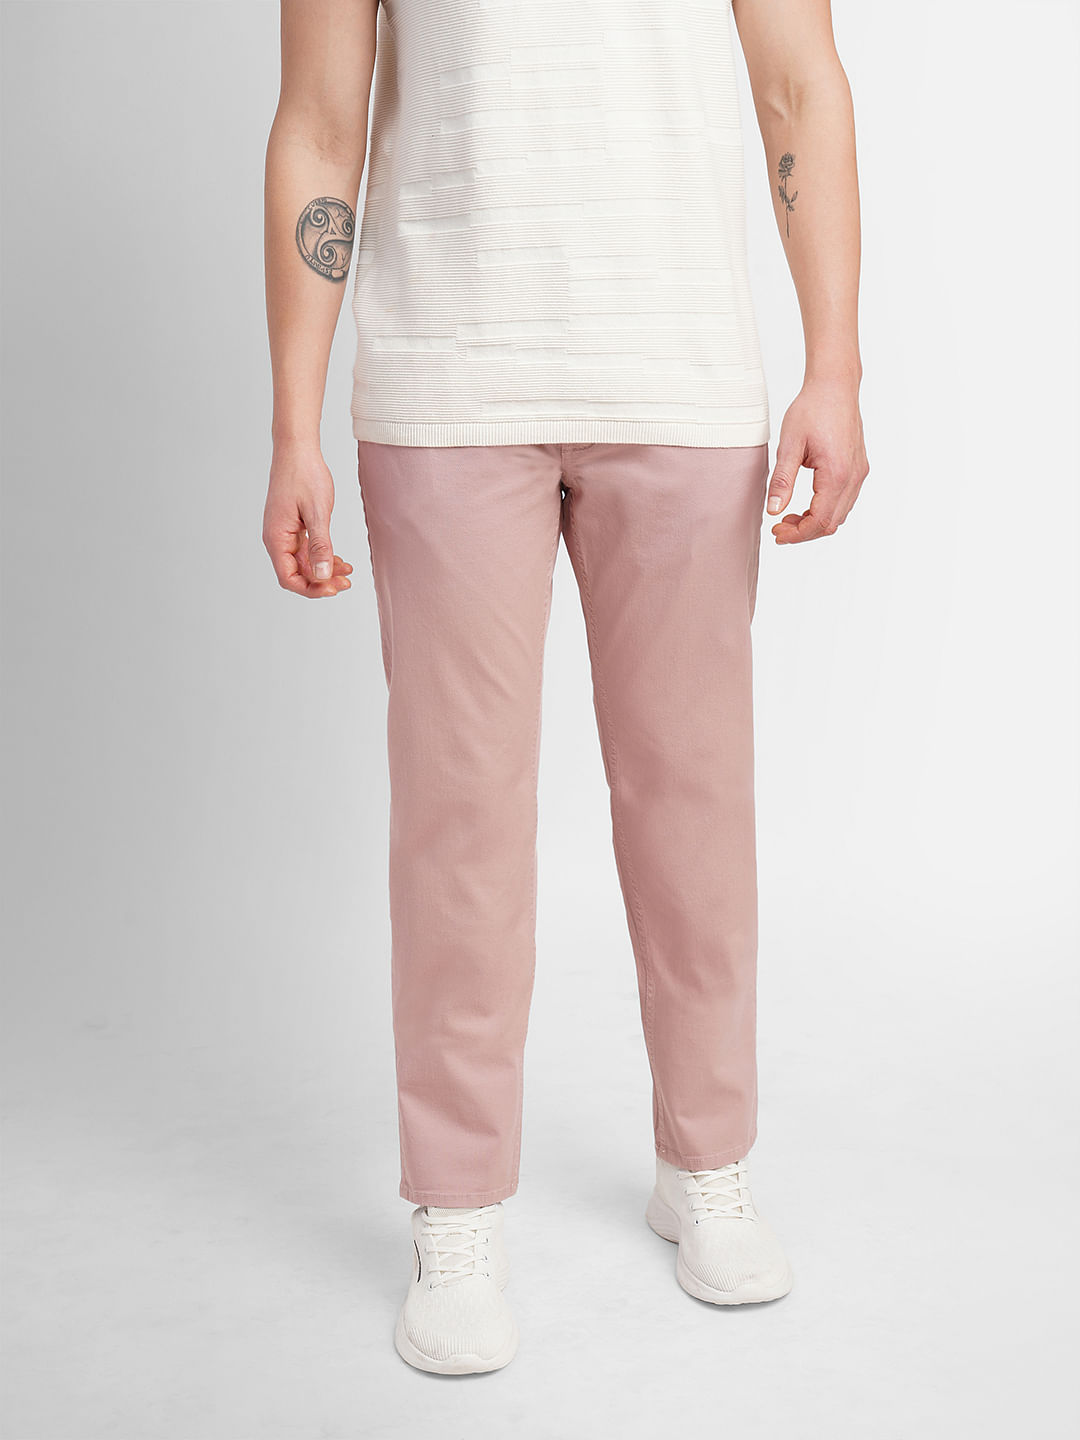 Buy Lotus Chino  Casual Pink Solid Chinos for Men Online  Andamen